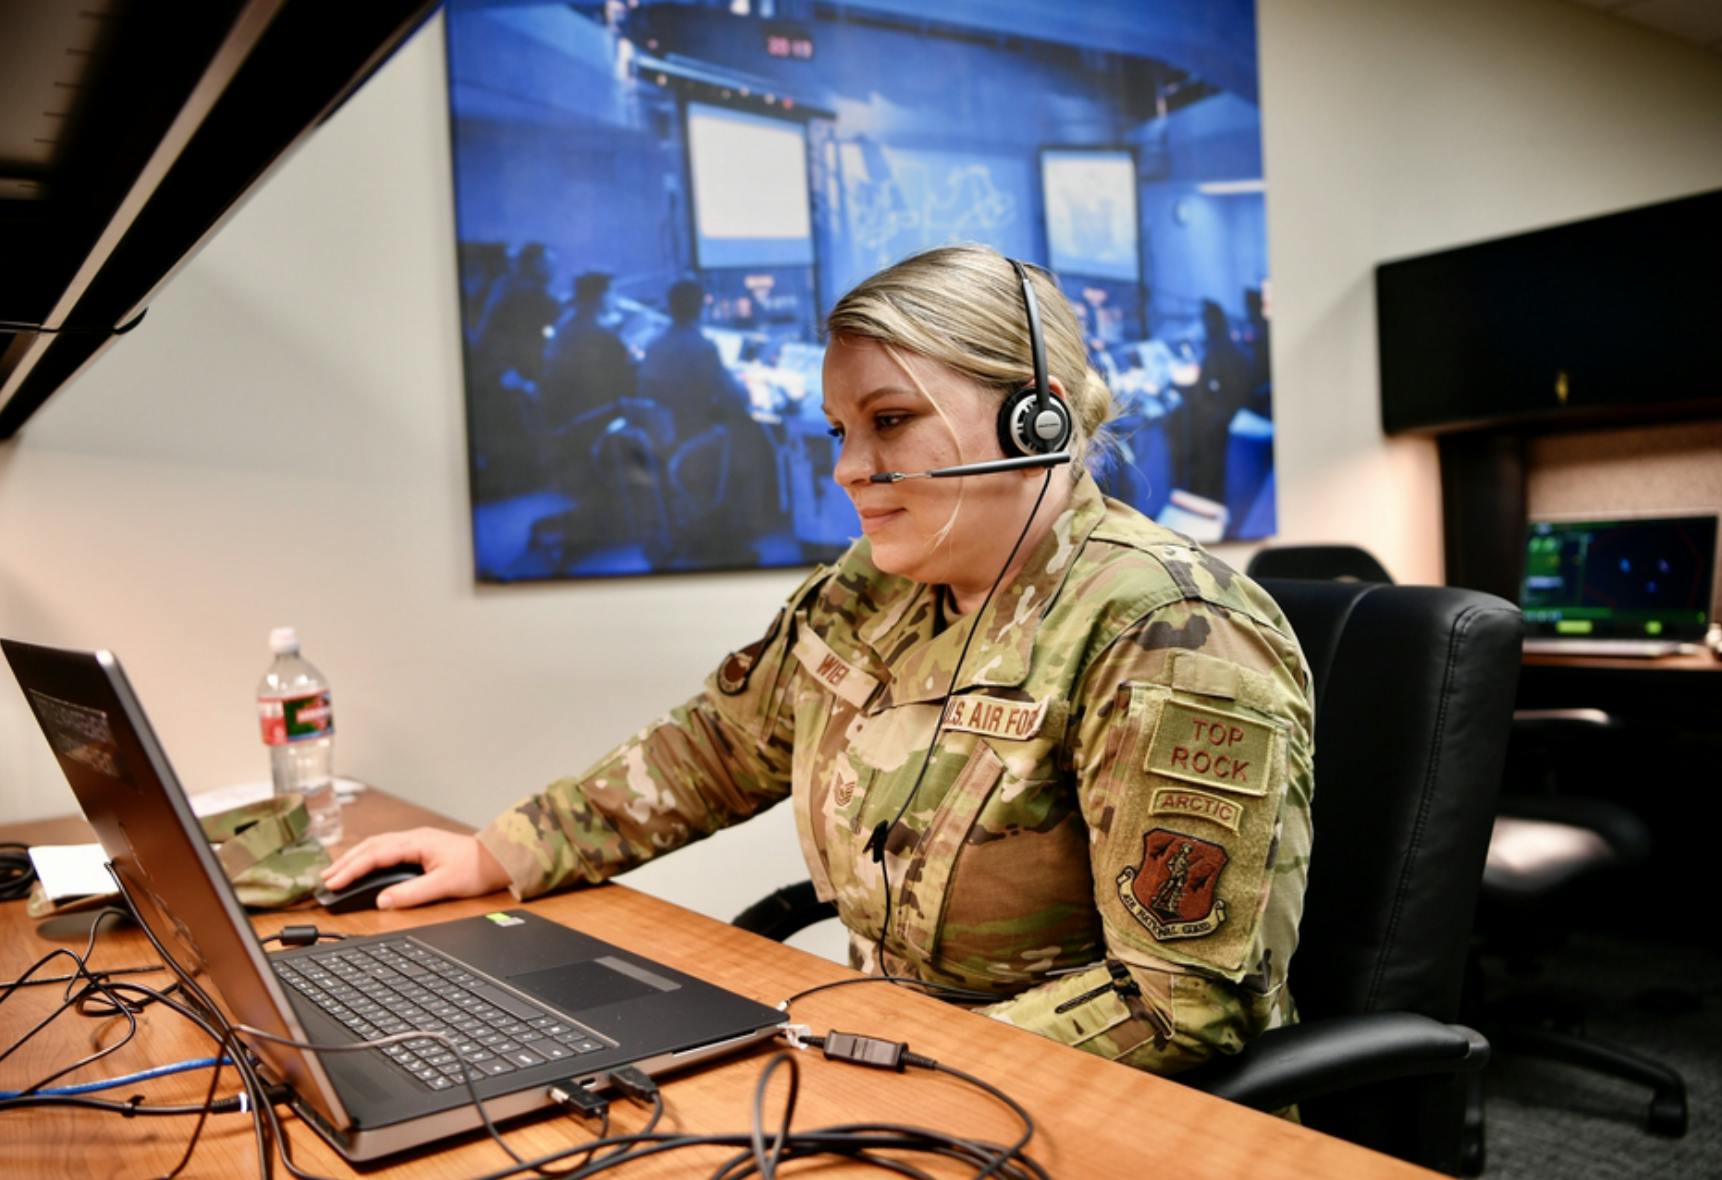 Woman in fatigues sits at desk with headphones on and looking at laptop in front of her. Related to: chief digital officer, dod CDO, dod mission, ai talent, artificial intelligence experts.